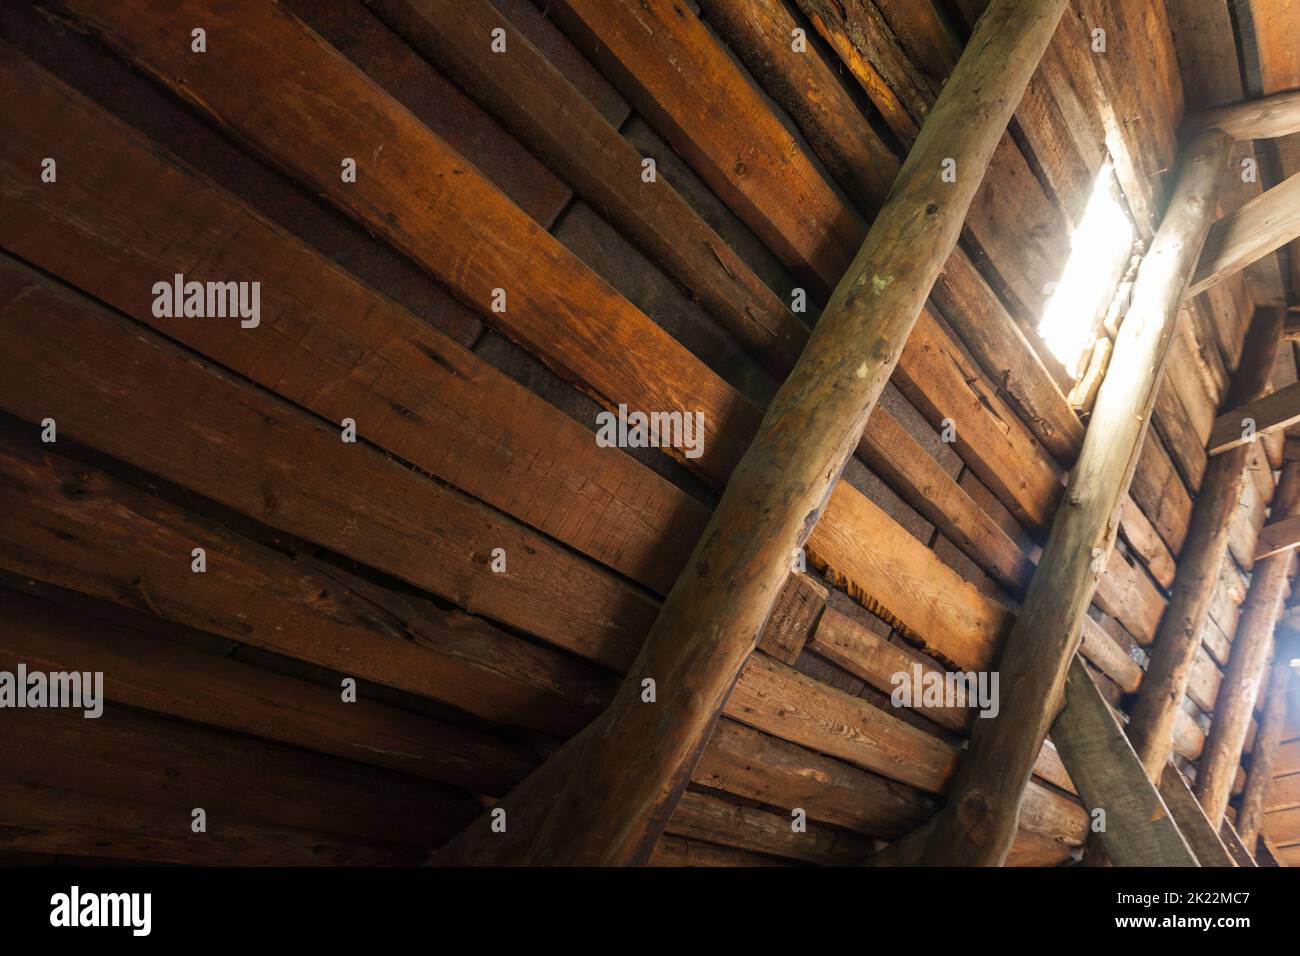 Abstract grunge wooden interior, glowing light window in an attic room Stock Photo